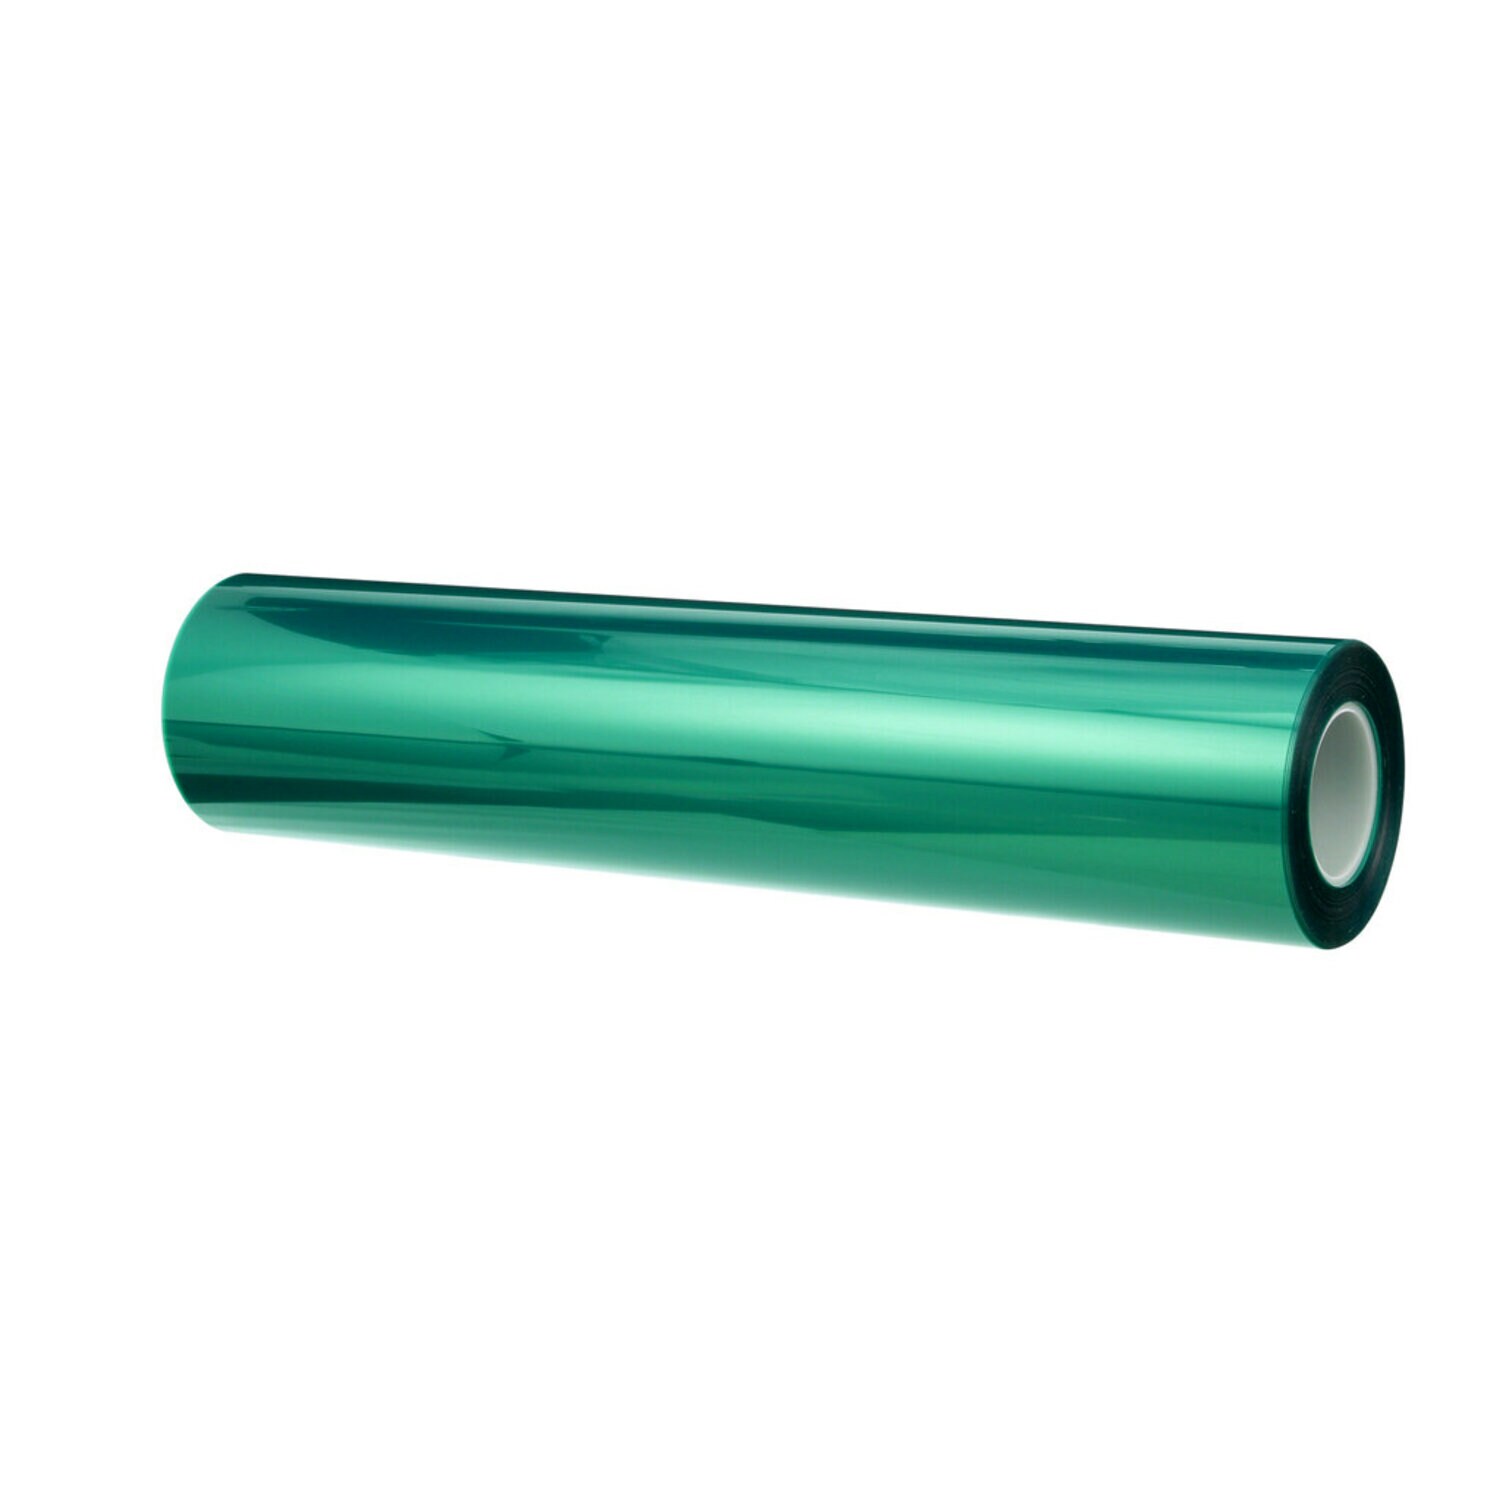 7010335964 - 3M Polyester Tape 8992L, Green, 25 in x 72 yd, 3.2 mil, 1 roll per case